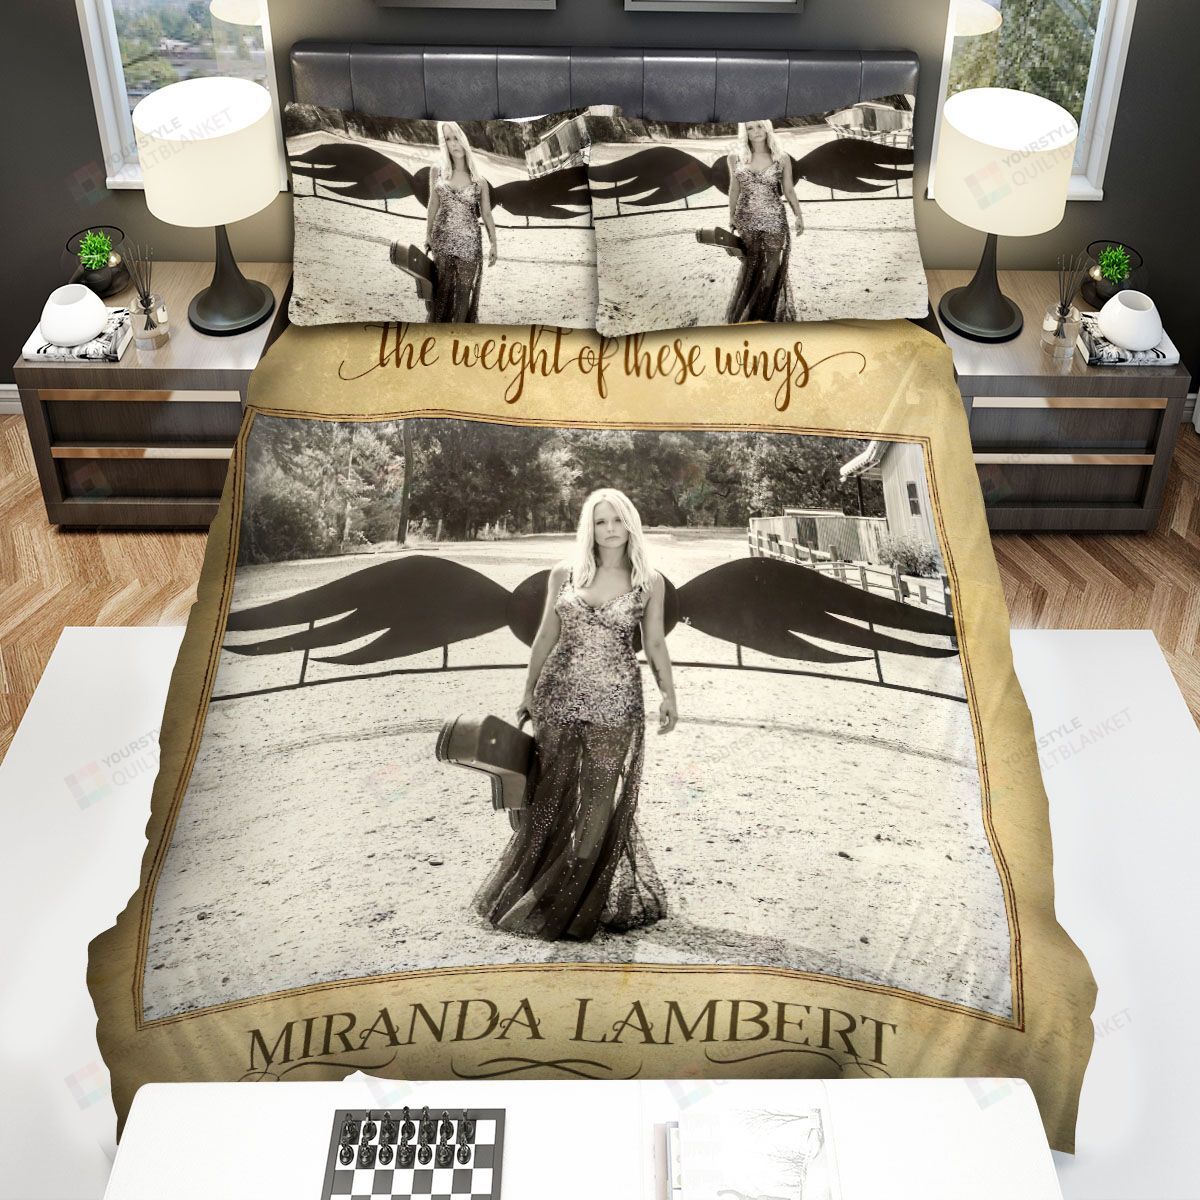 Miranda Lambert The Weight Of These Wings Album Cover Bed Sheets Spread Comforter Duvet Cover Bedding Sets